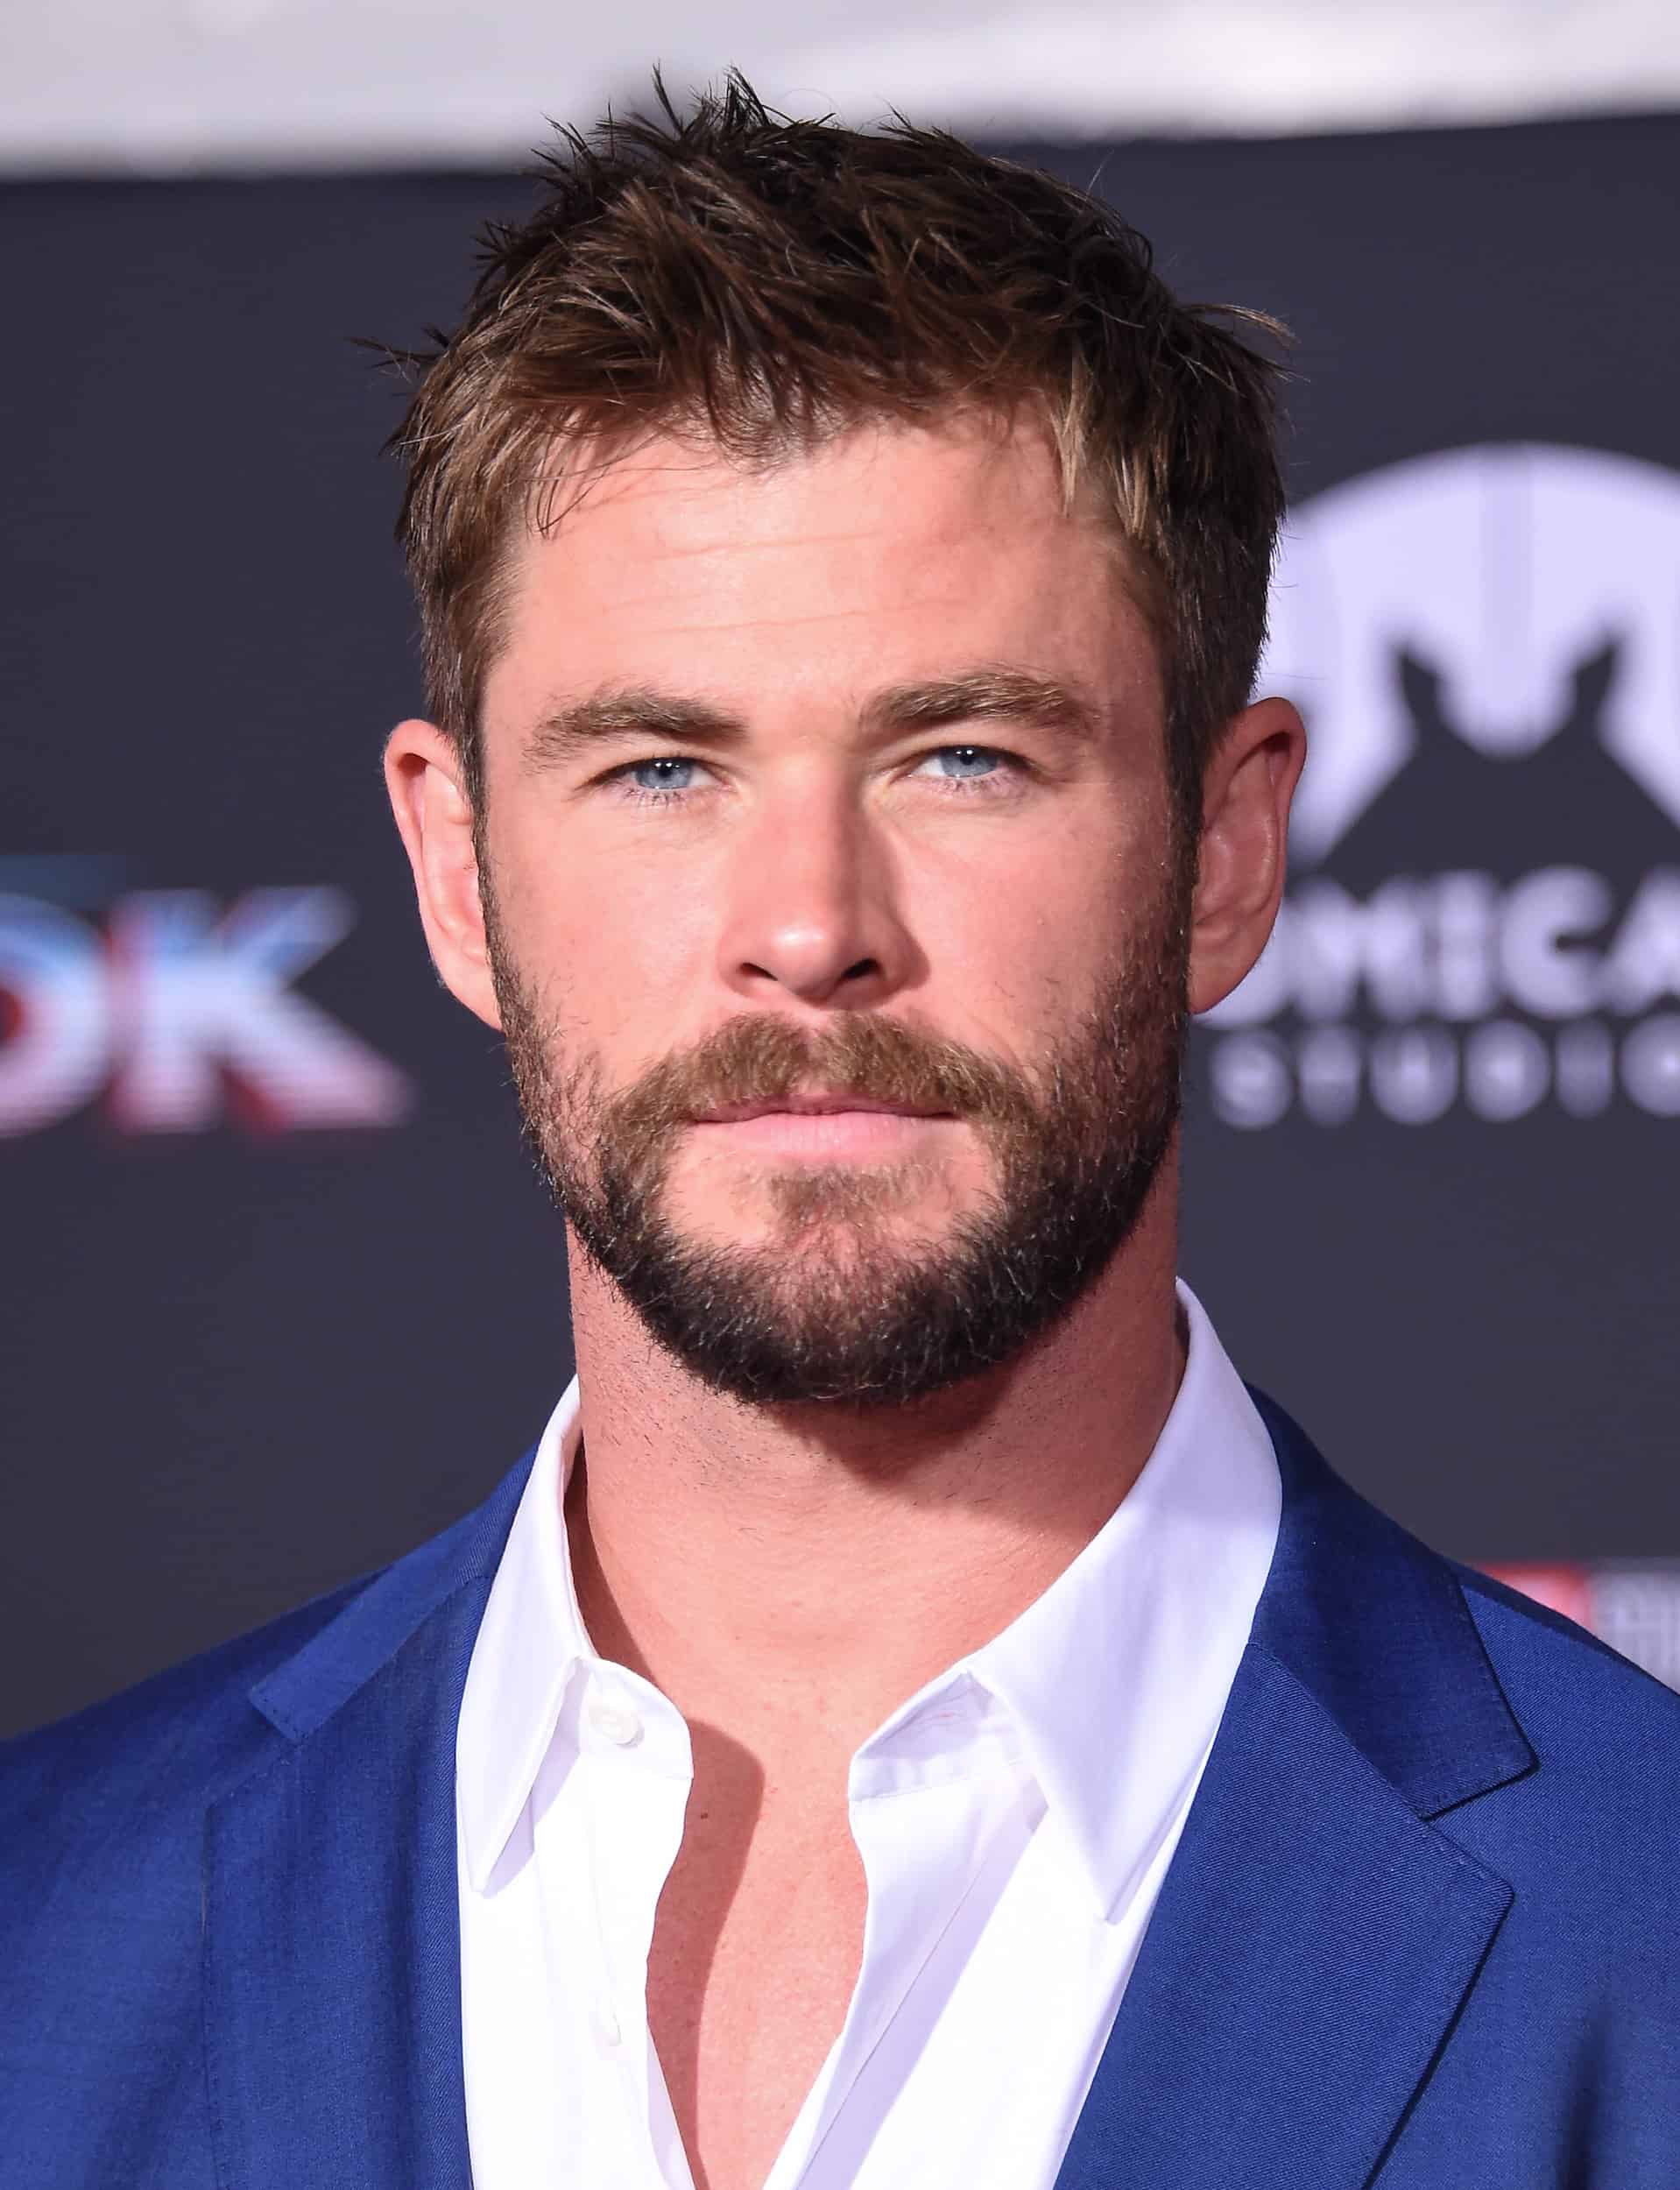 What Cologne Does Chris Hemsworth Wear